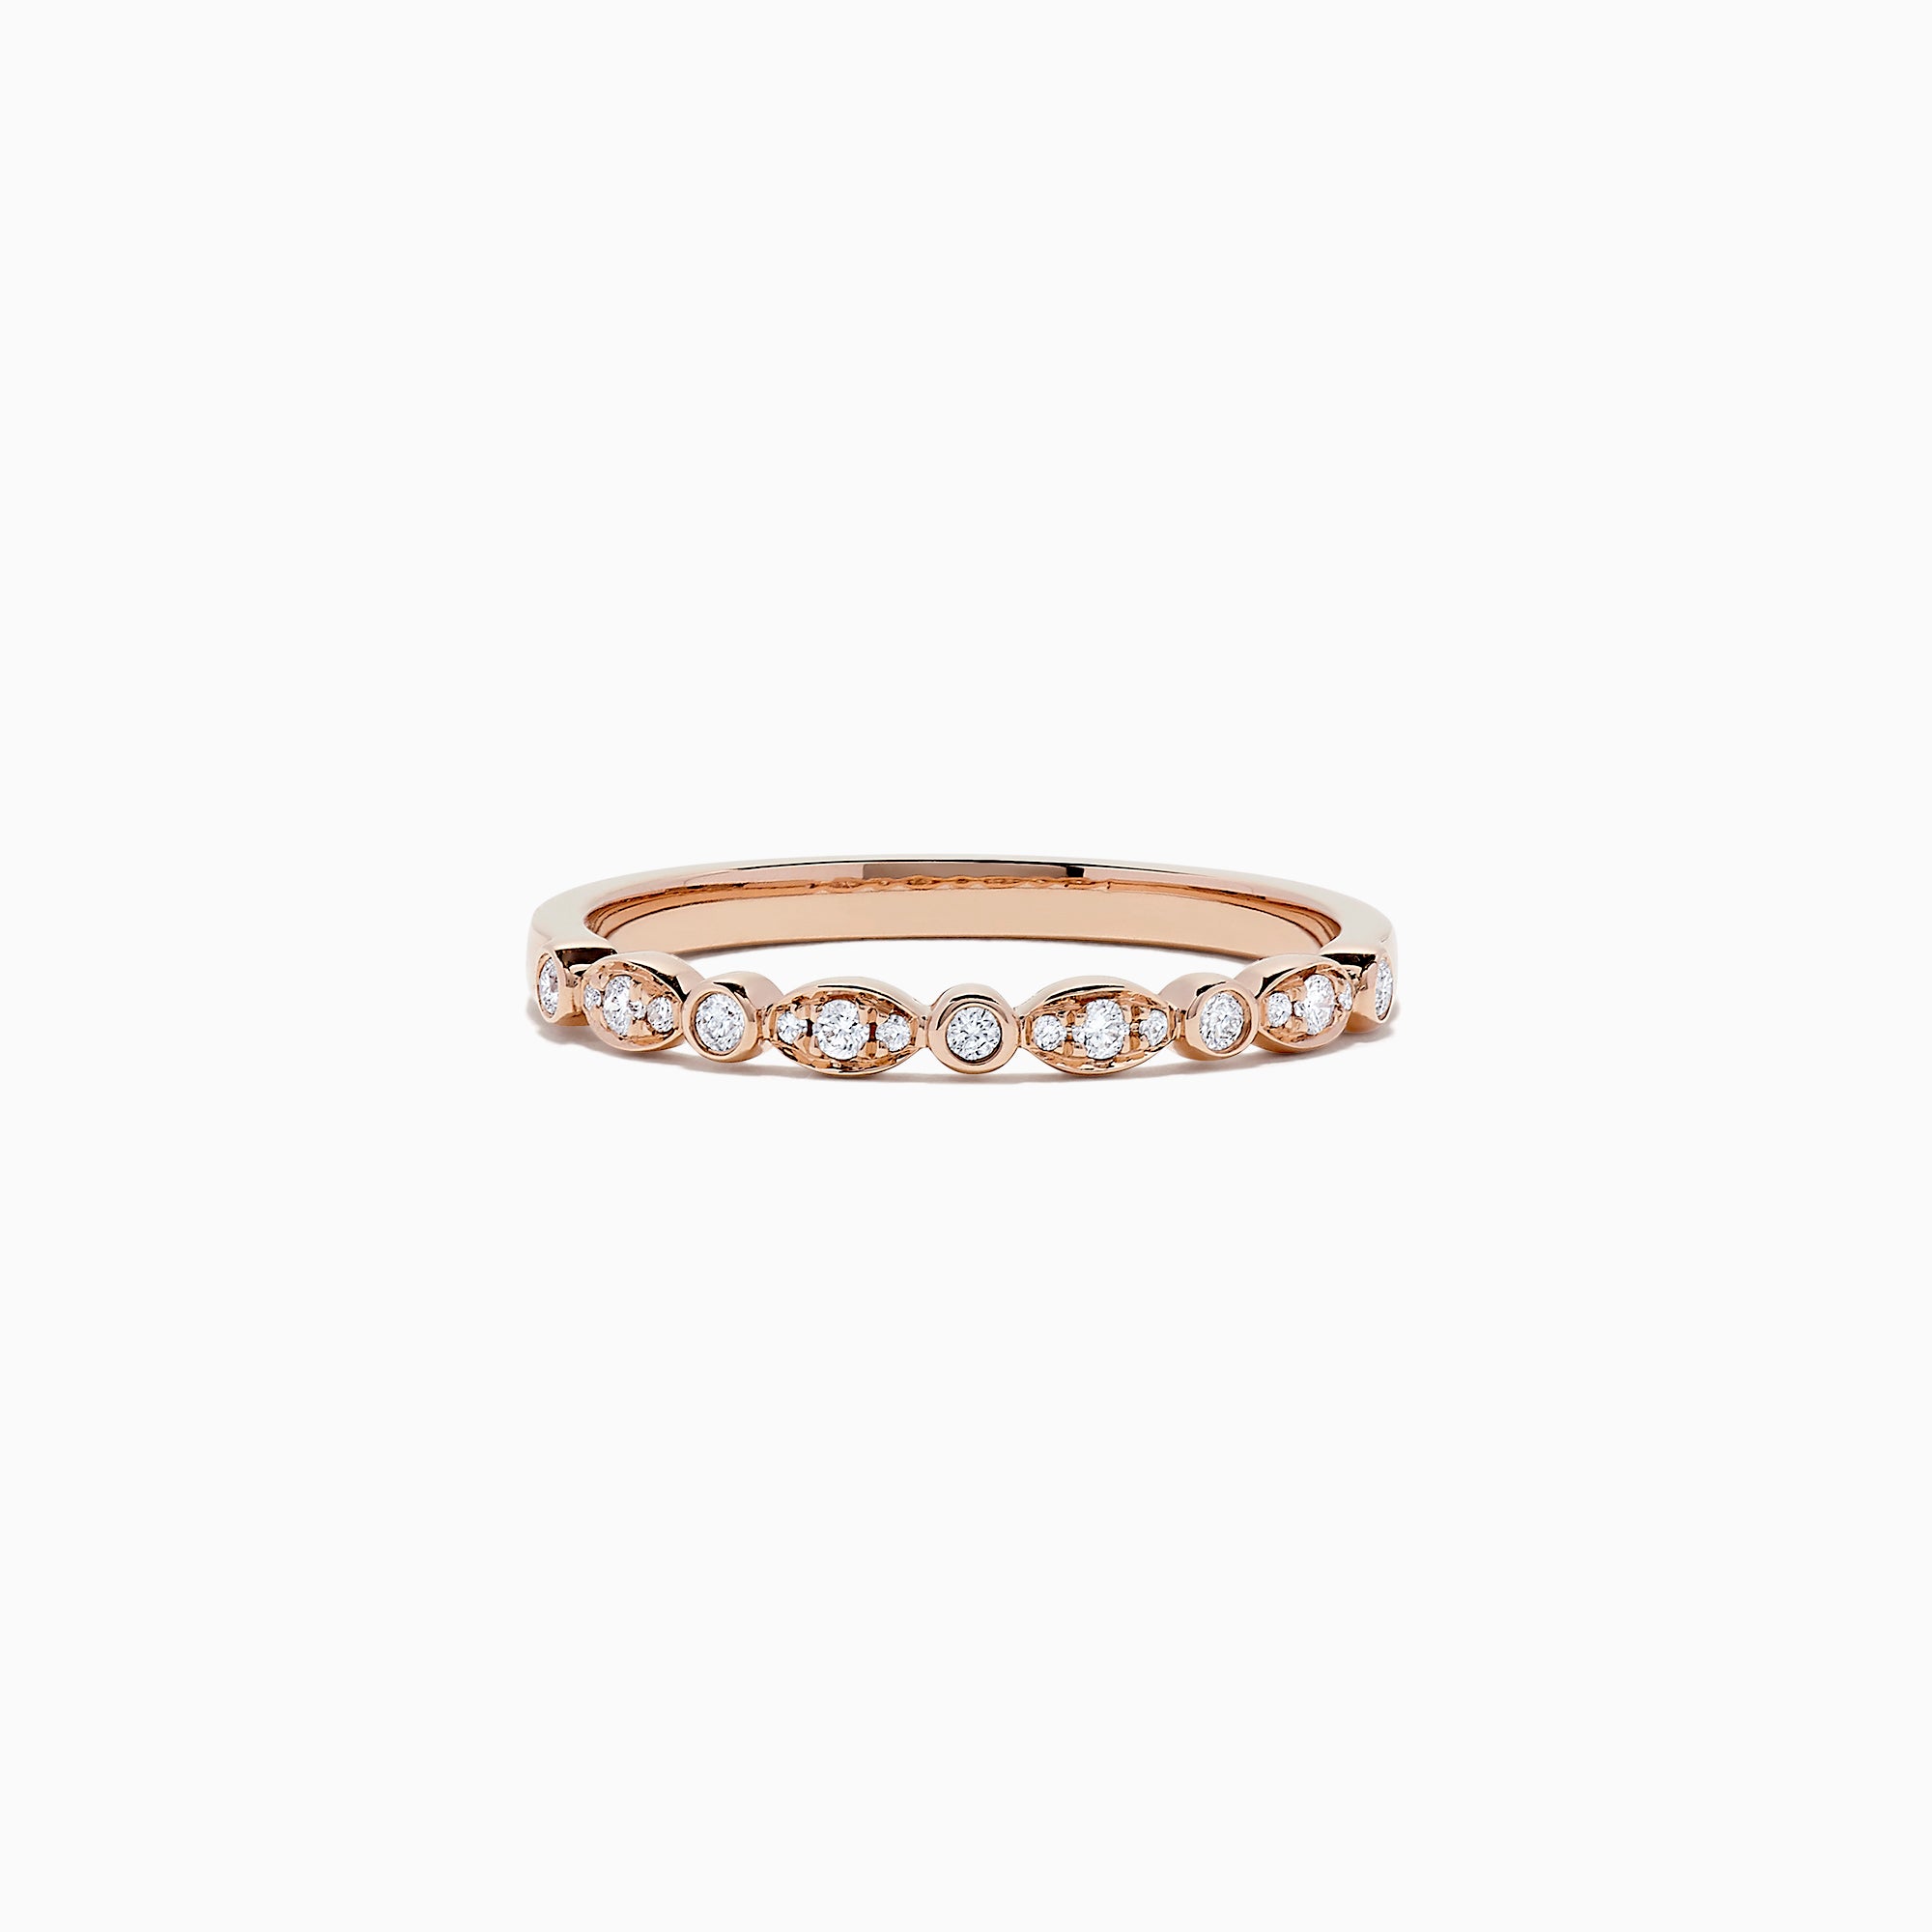 Effy Ruby Royale 14K Rose Gold Ruby and Diamond Stacking Ring Set, 1.19 TCW